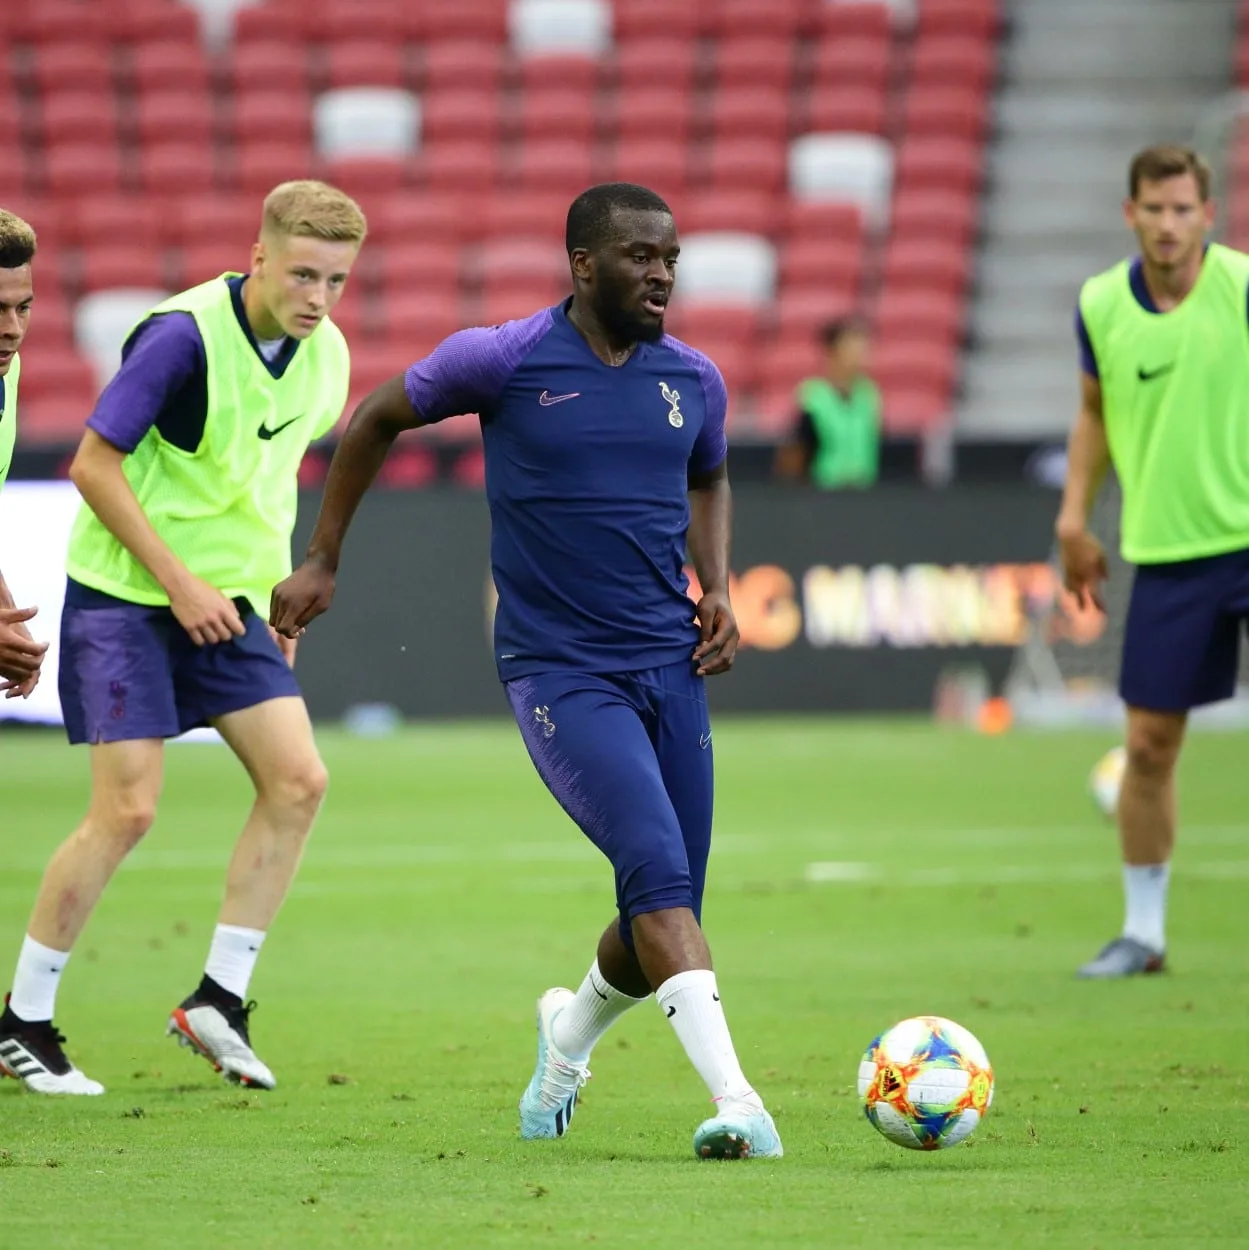 Ndombele trains with the Spurs team